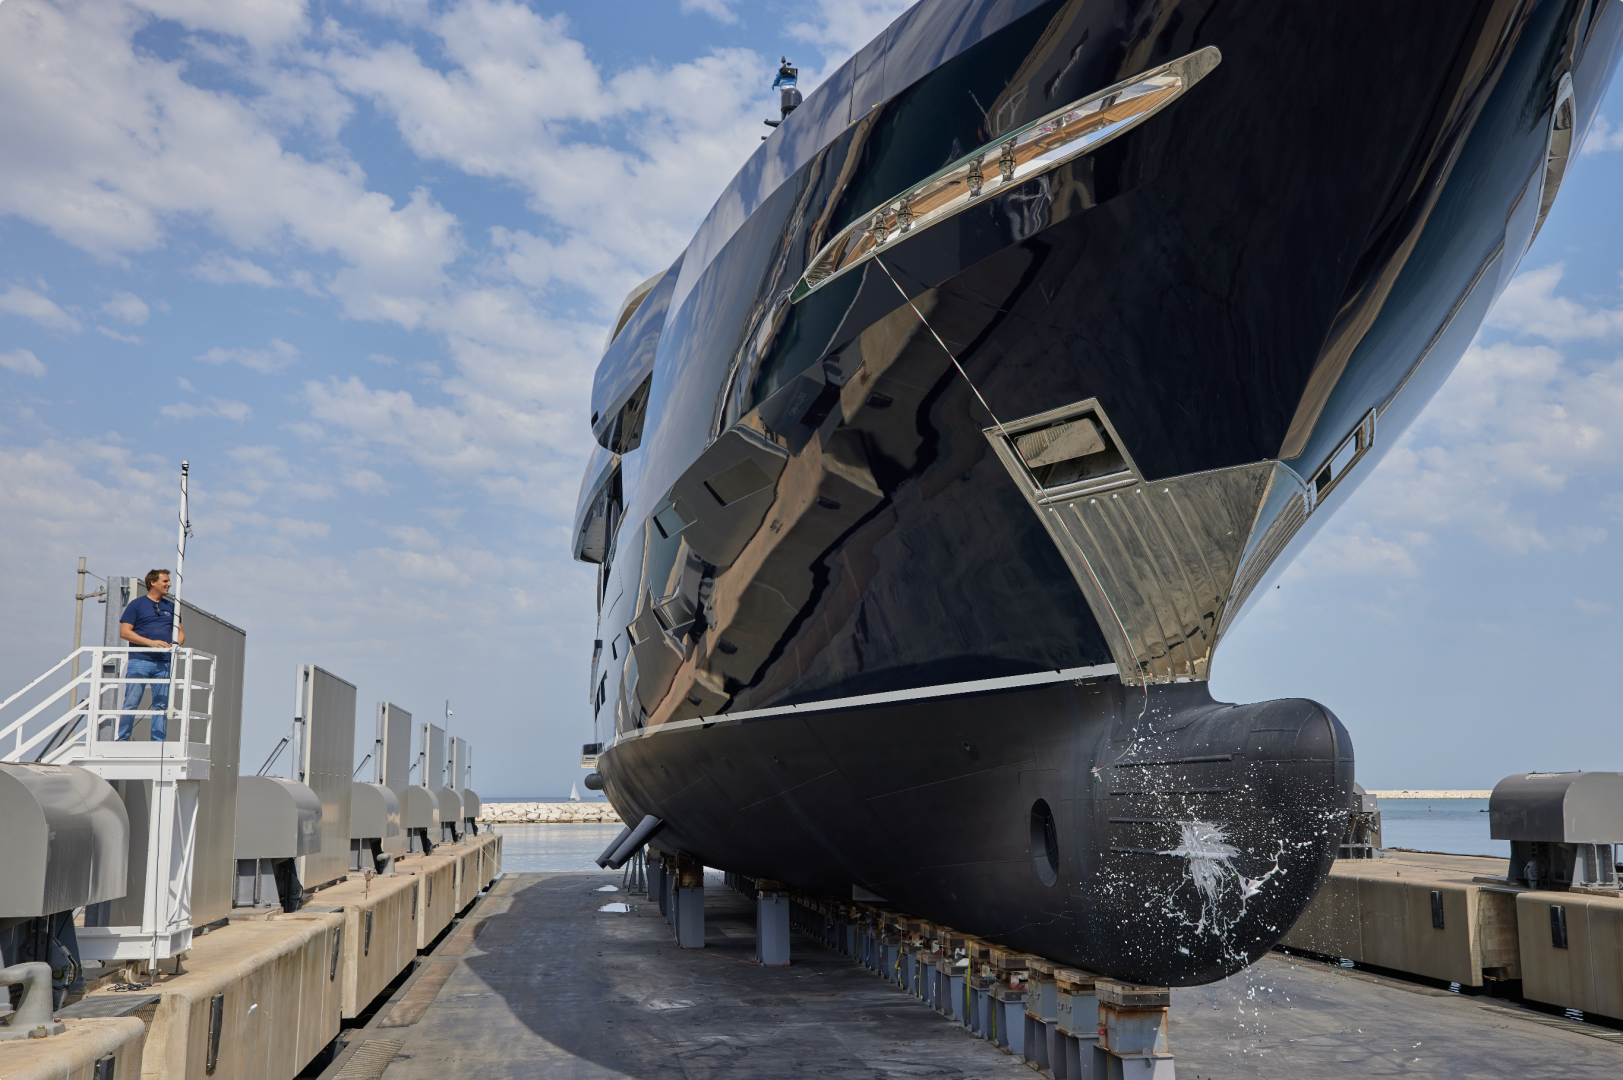 Isa Yachts announces the launch of the Classic 65 m M/Y Resilience